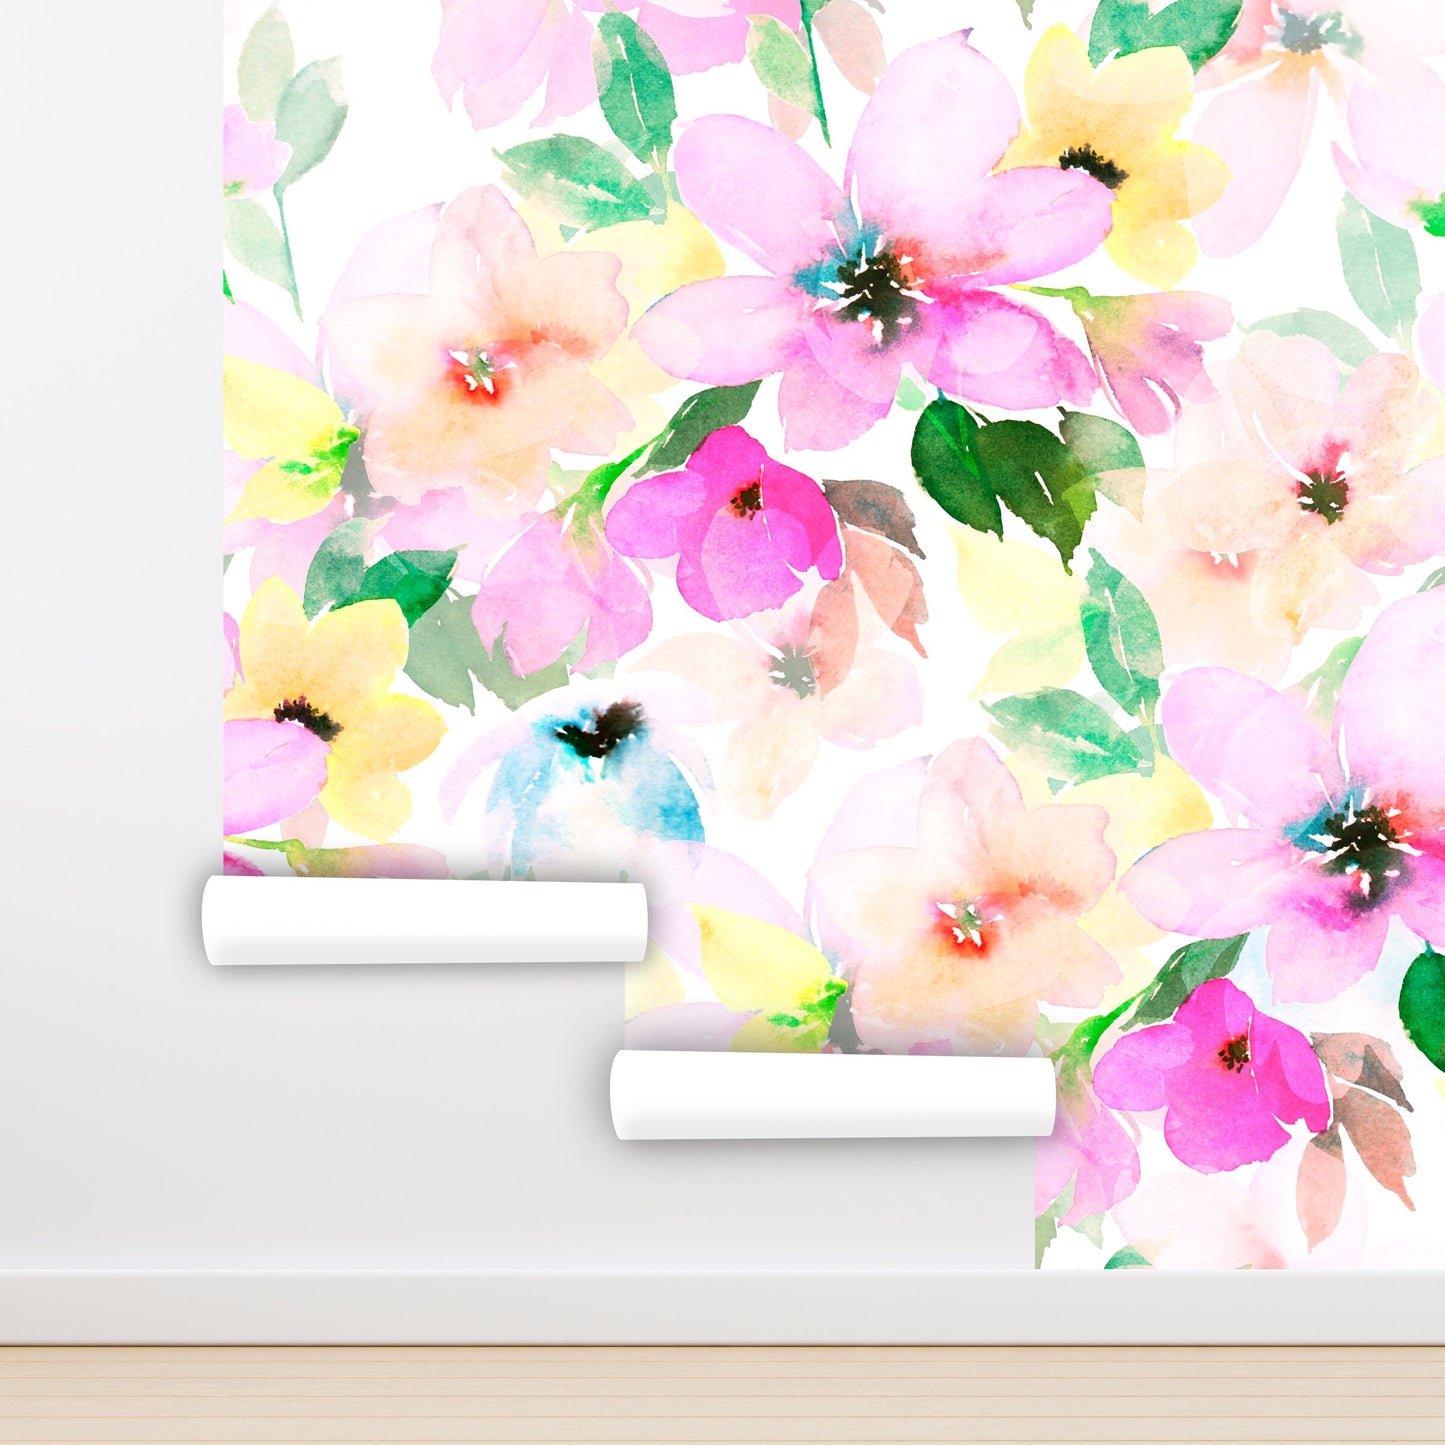 Spring Wallpaper Peel and Stick, Watercolor Floral Wallpaper, Colorful Wallpaper, Big Flower Wallpaper, Removable Wall Paper